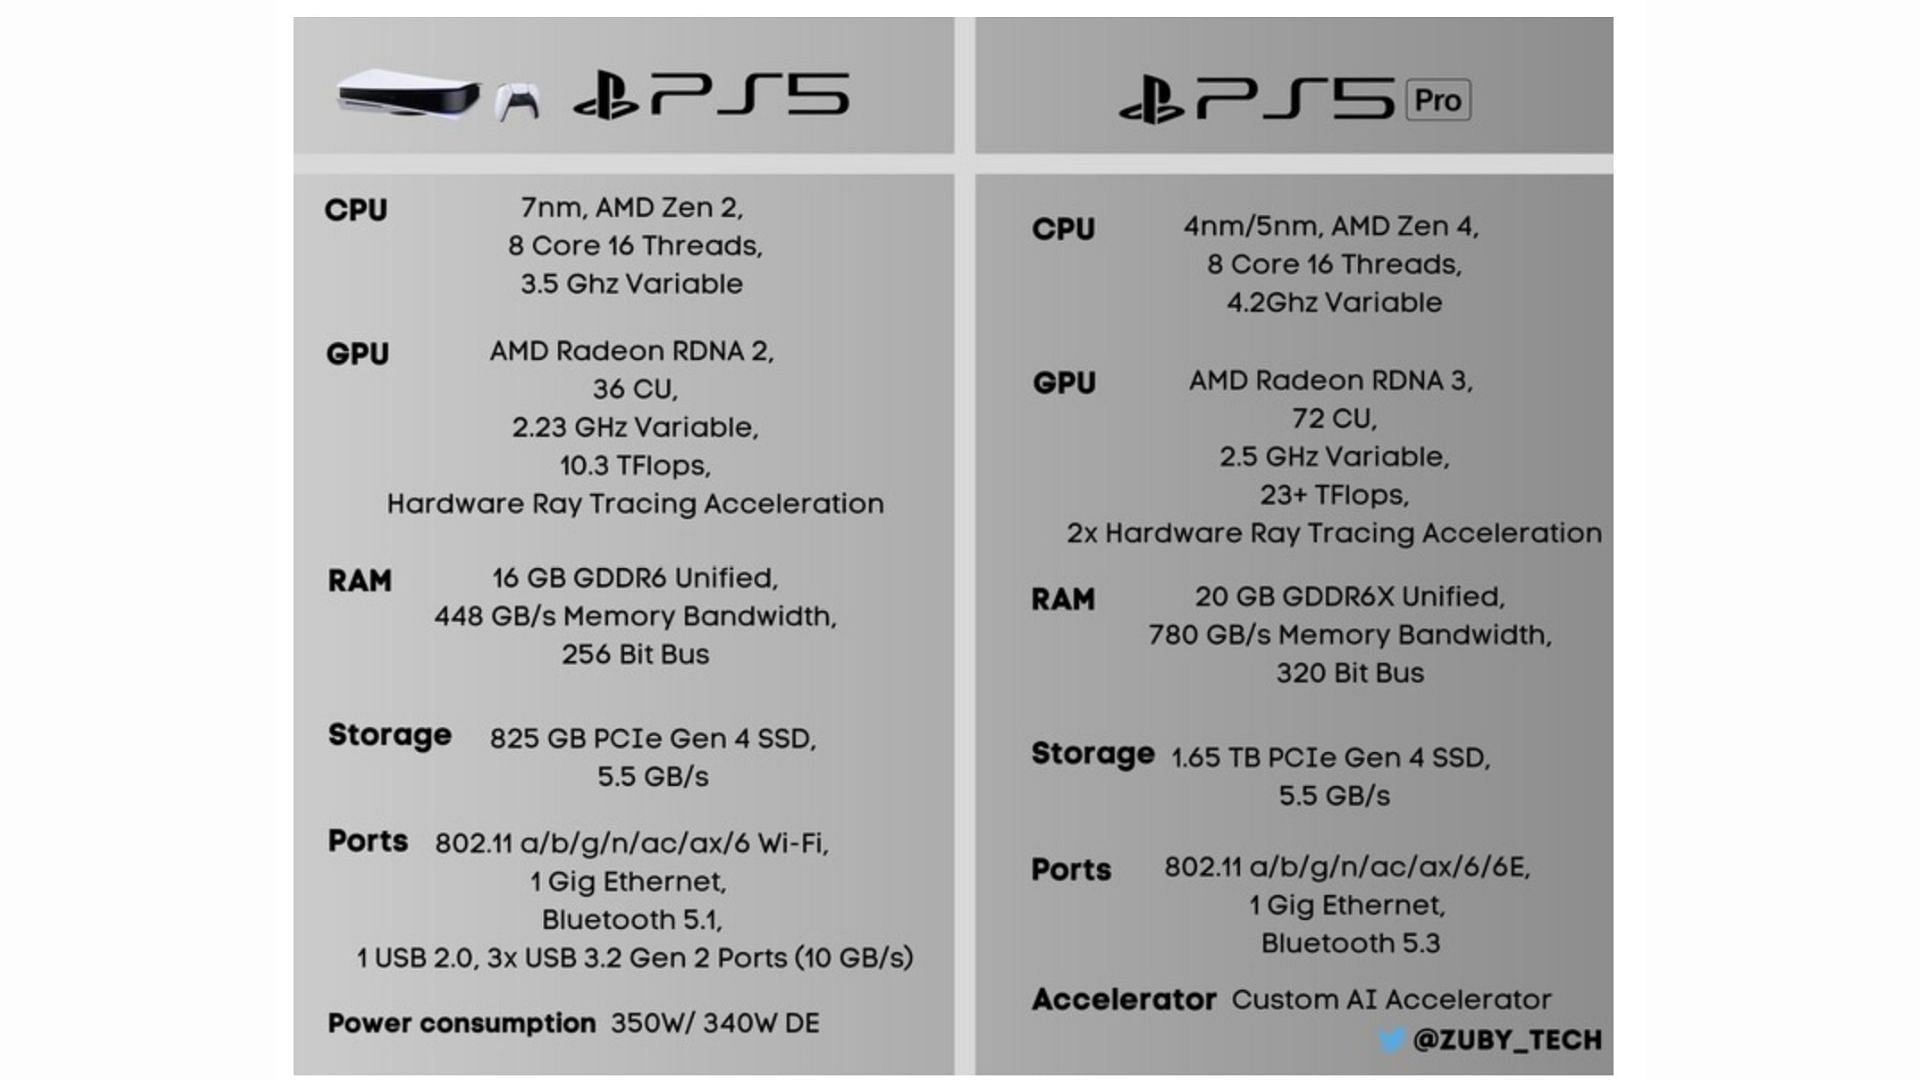 PS5 Pro expected release date, specs, price, and more